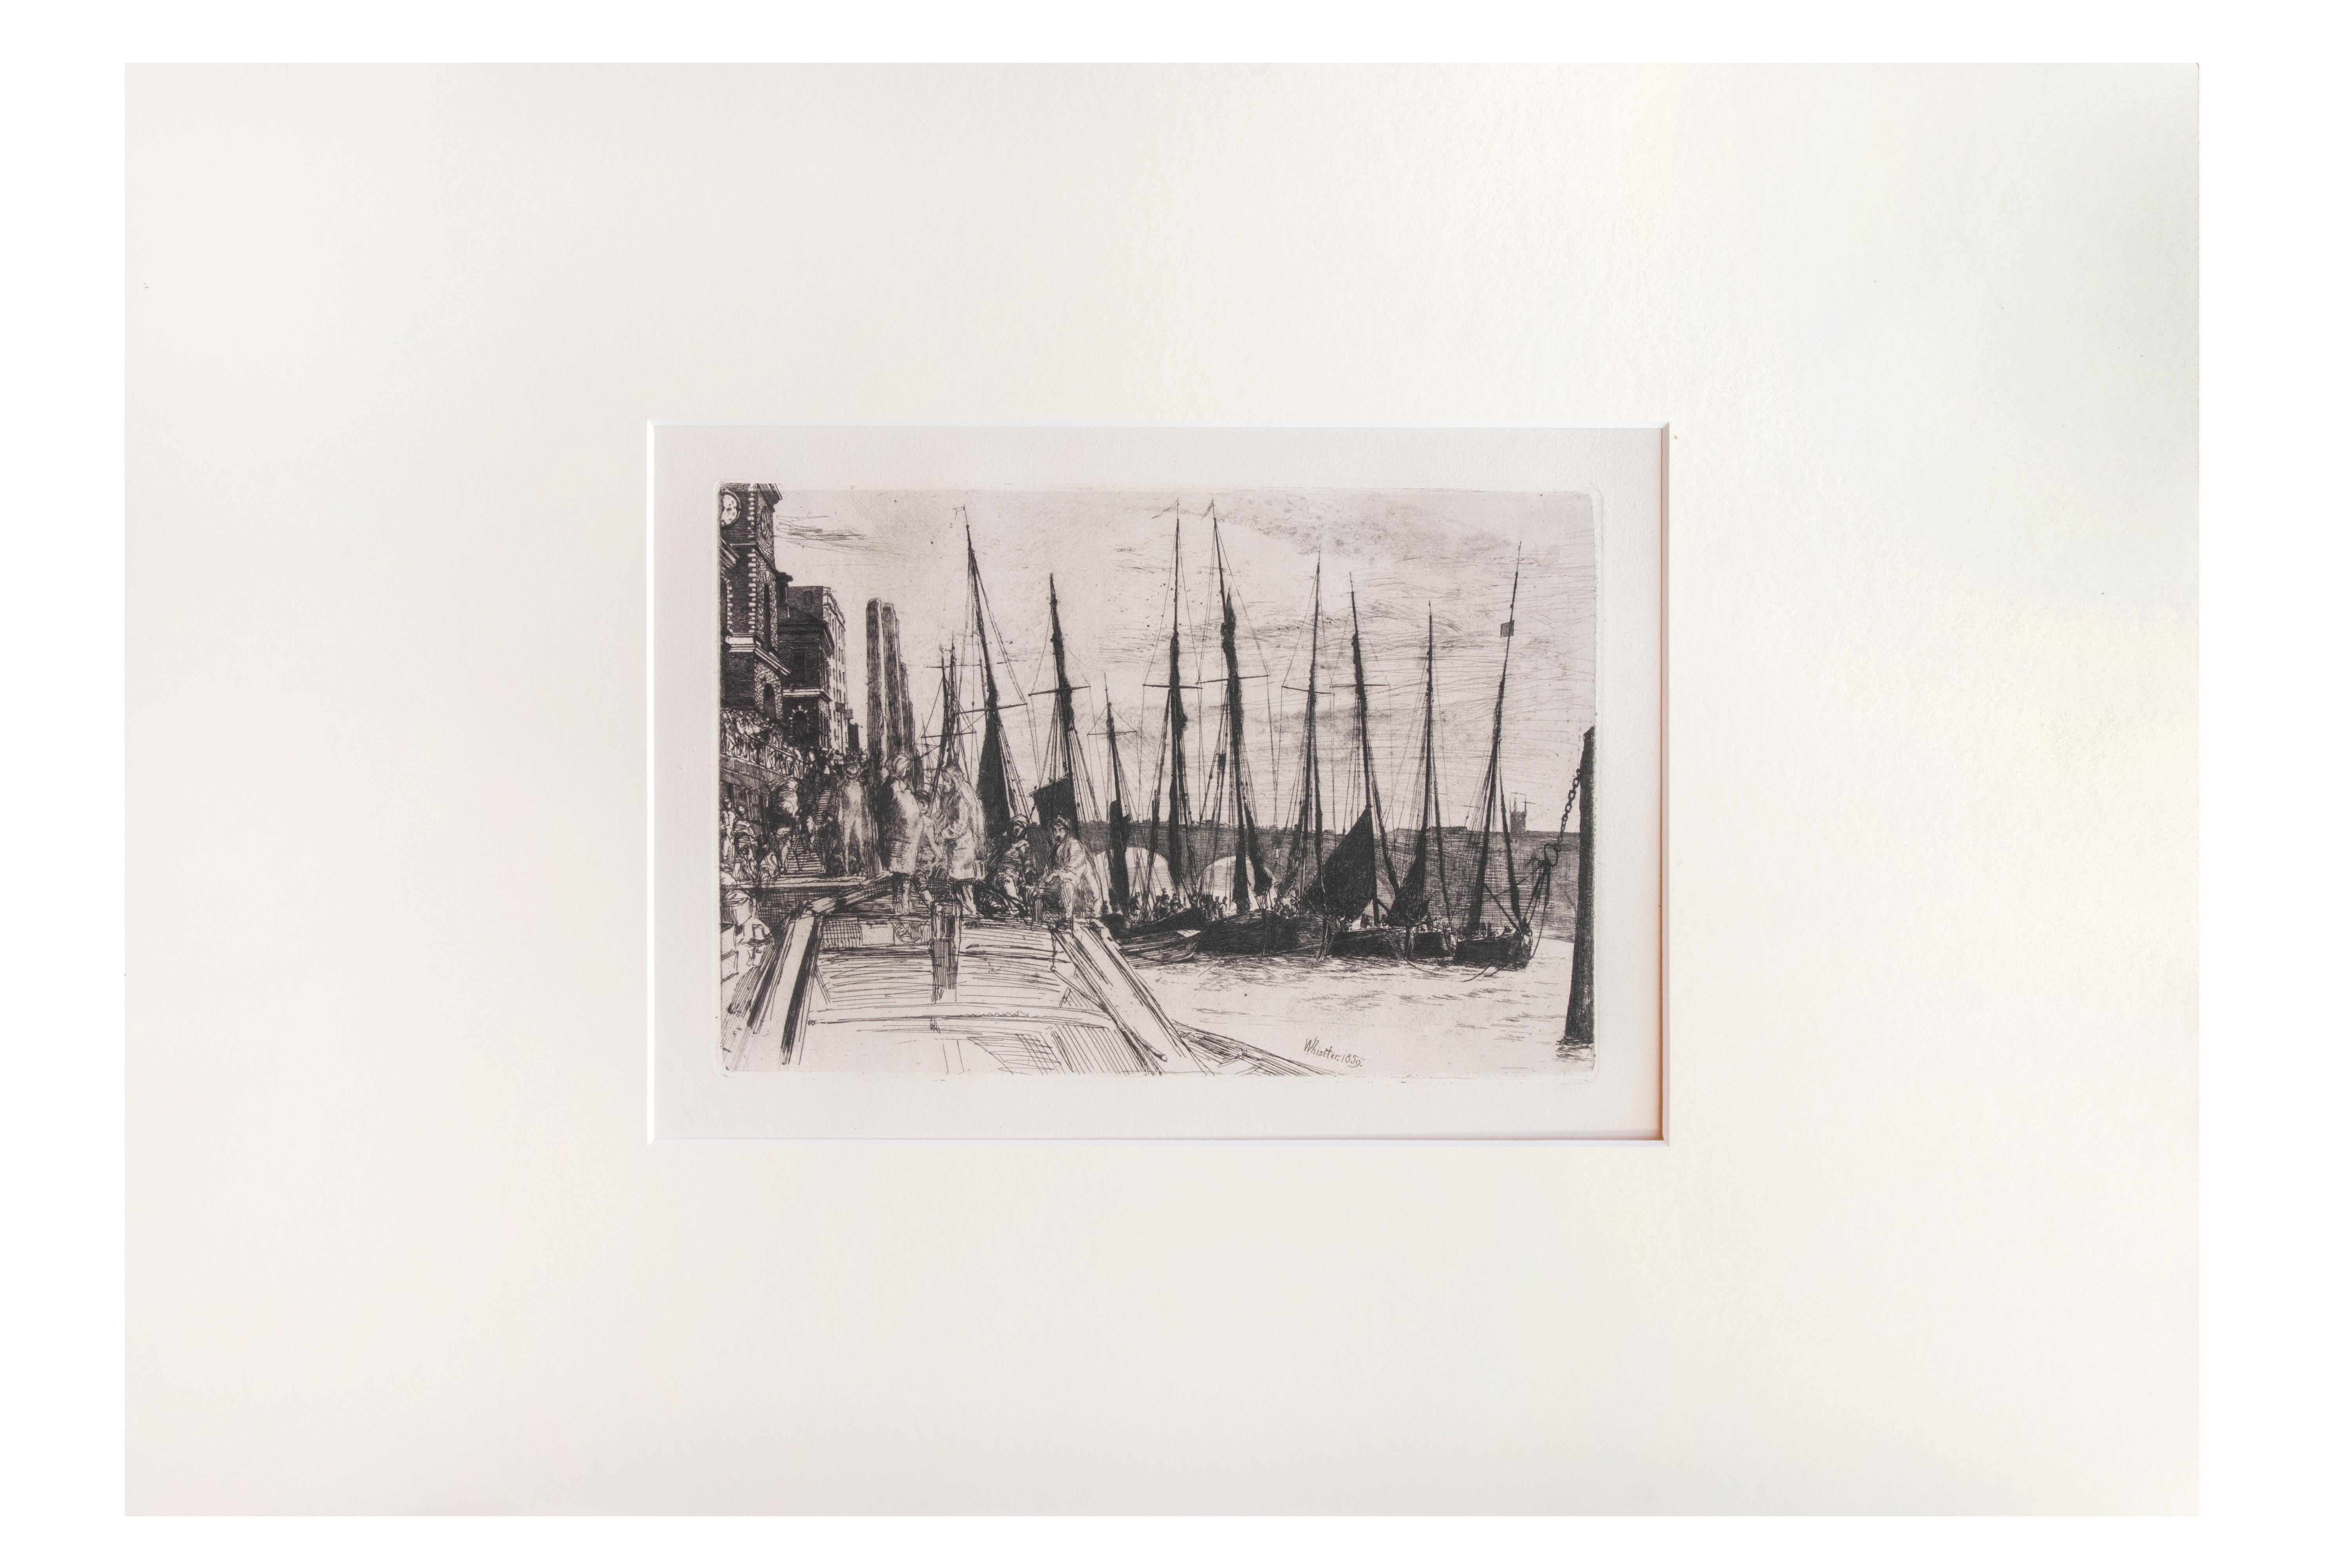 Billingsgate - Etching by James Whistler - 1859 - Print by James Abbott McNeill Whistler